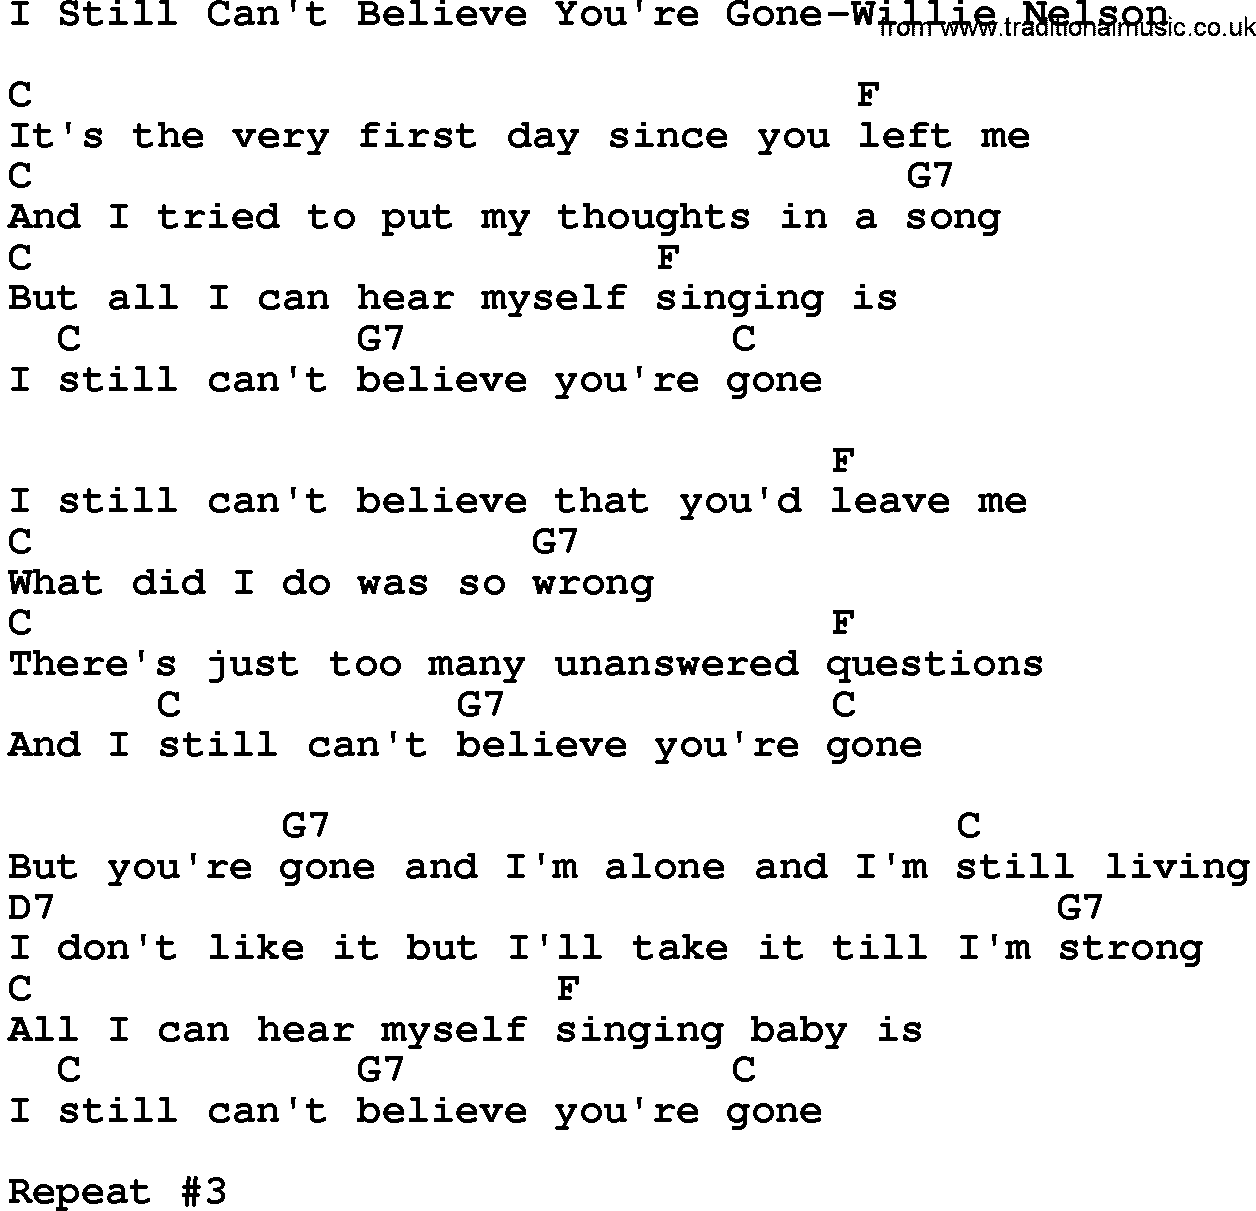 Country music song: I Still Can't Believe You're Gone-Willie Nelson lyrics and chords